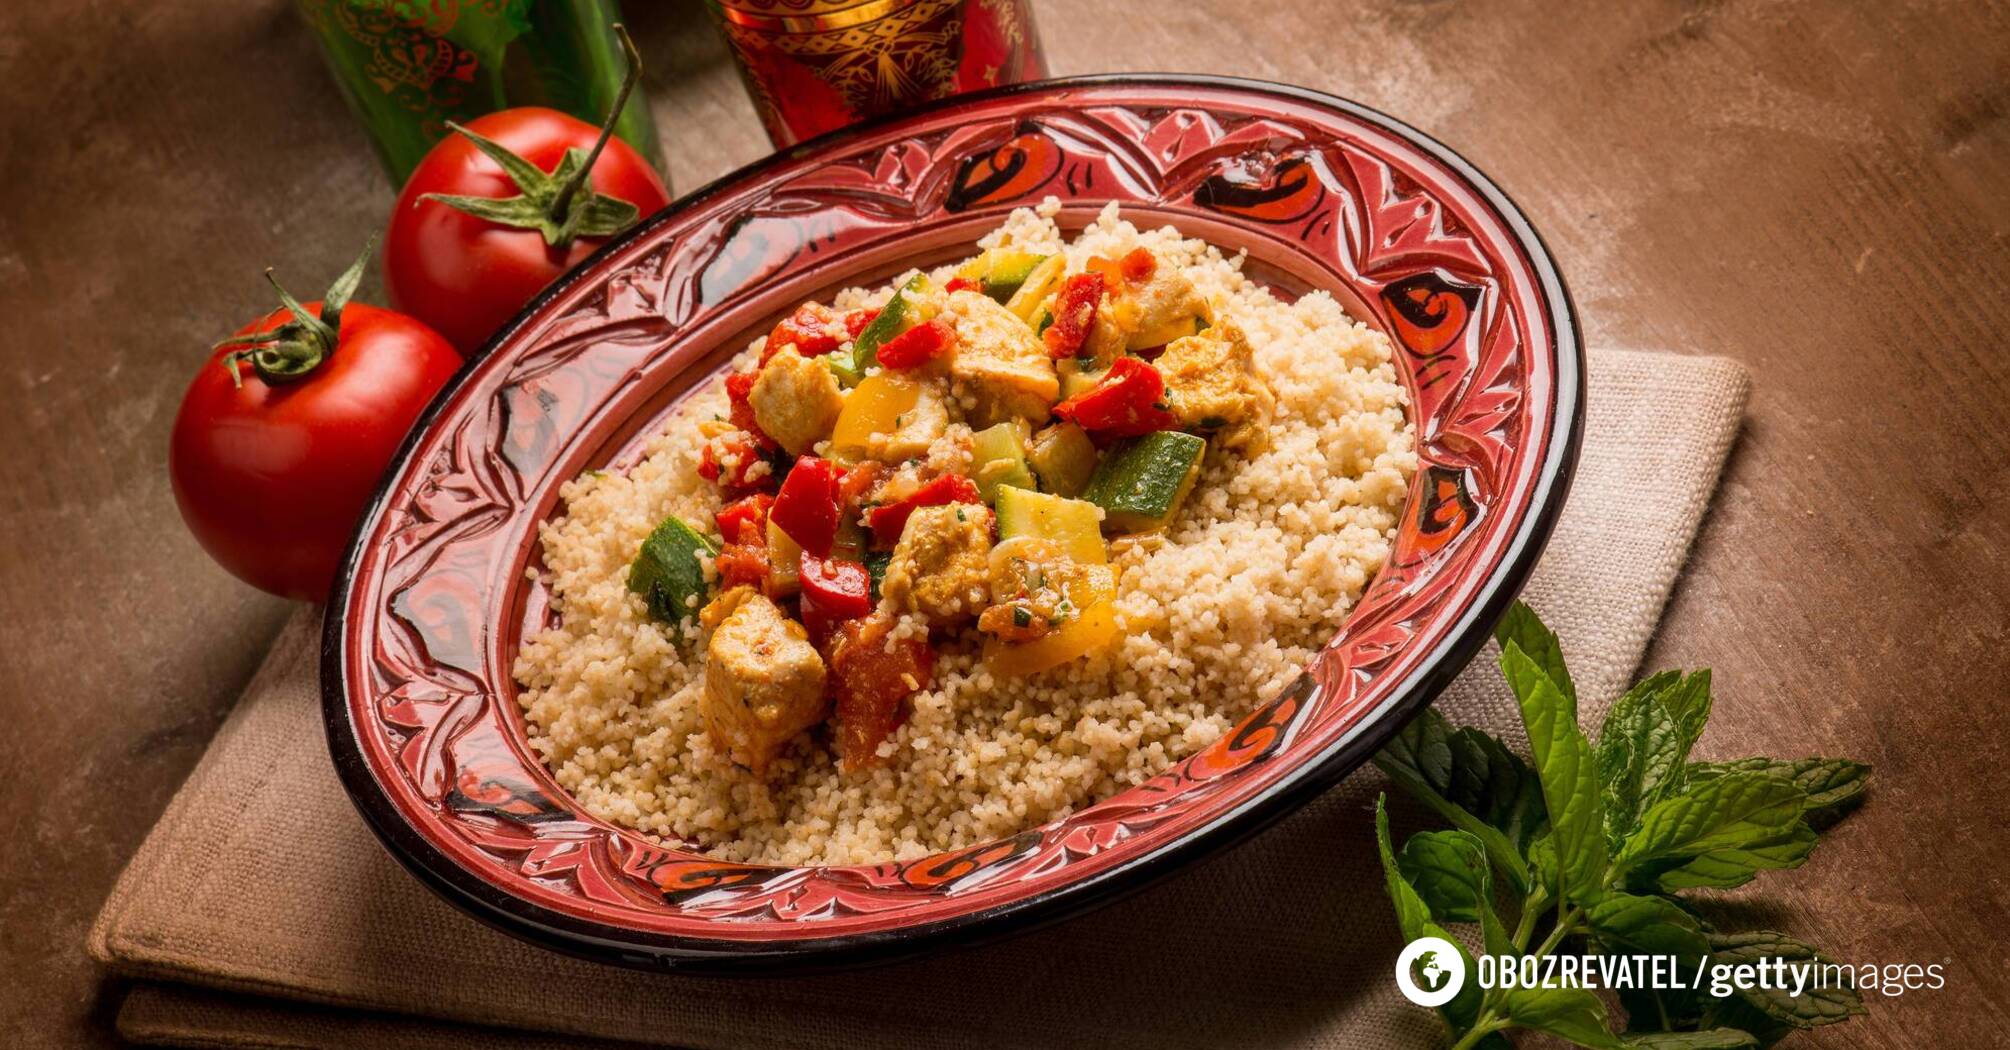 Couscous with chicken and vegetables is cooked very quickly